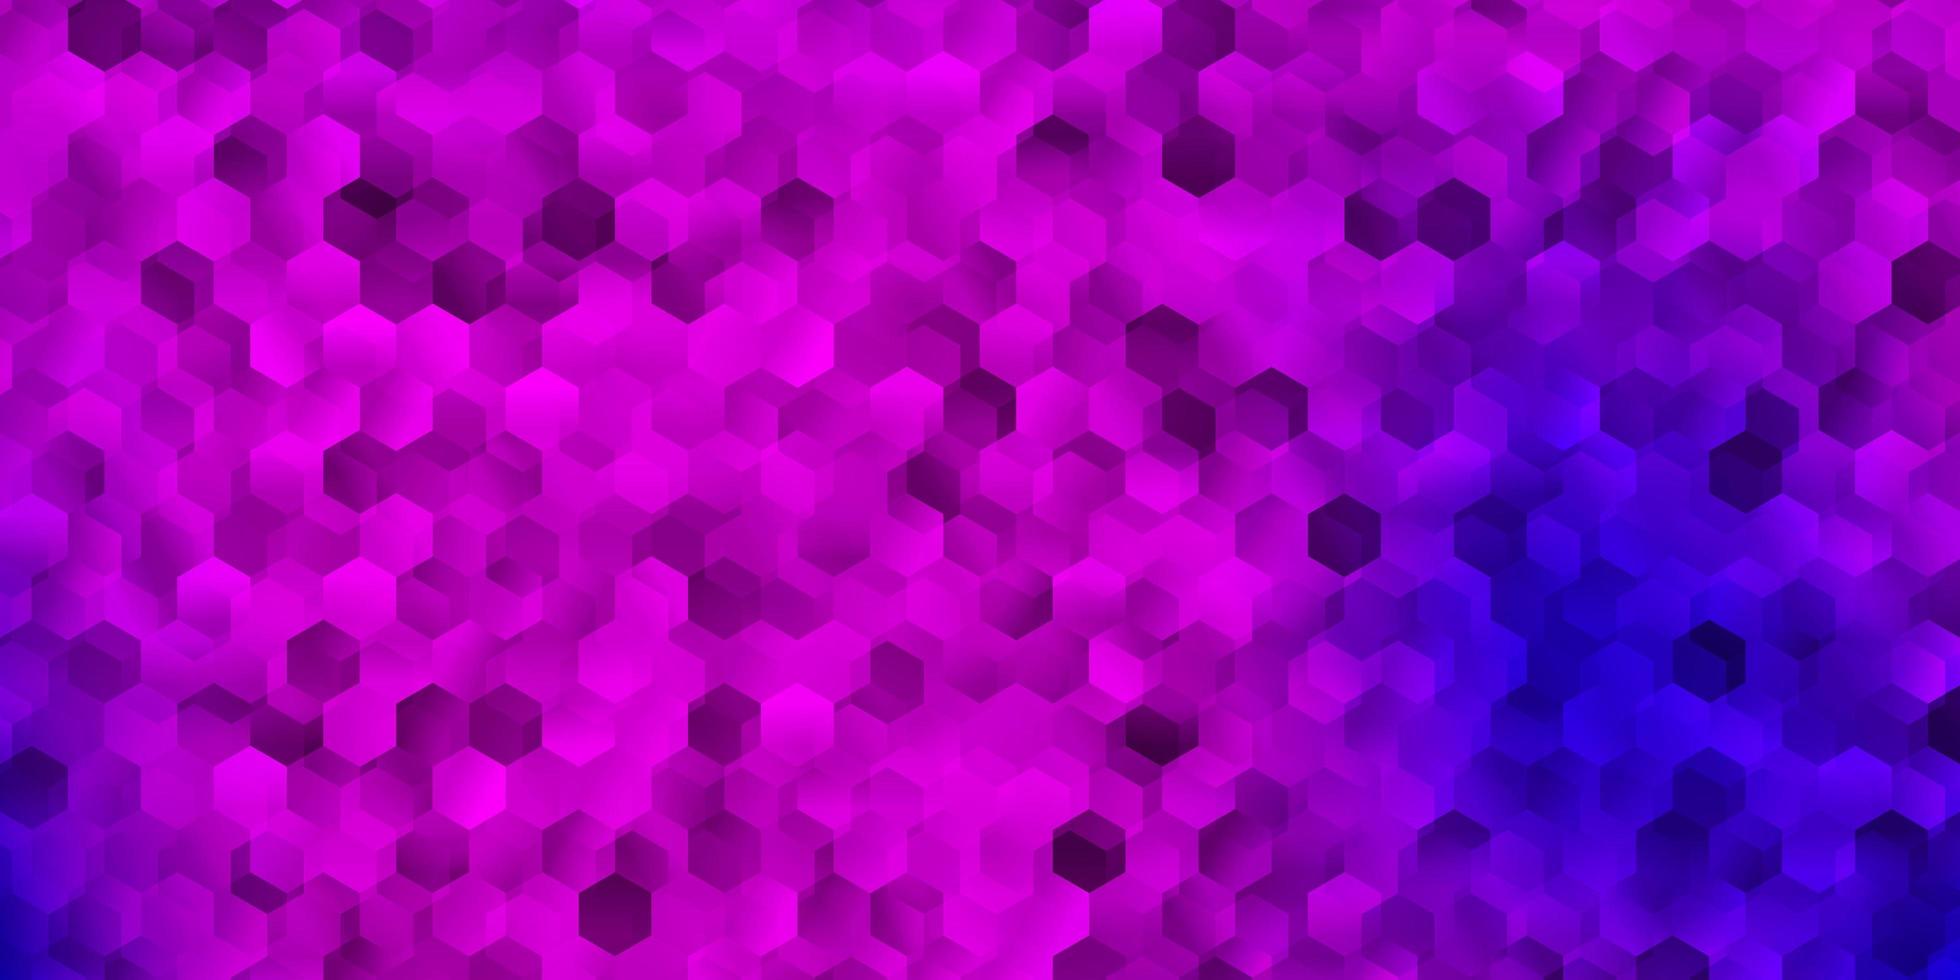 Light purple, pink vector layout with shapes of hexagons.